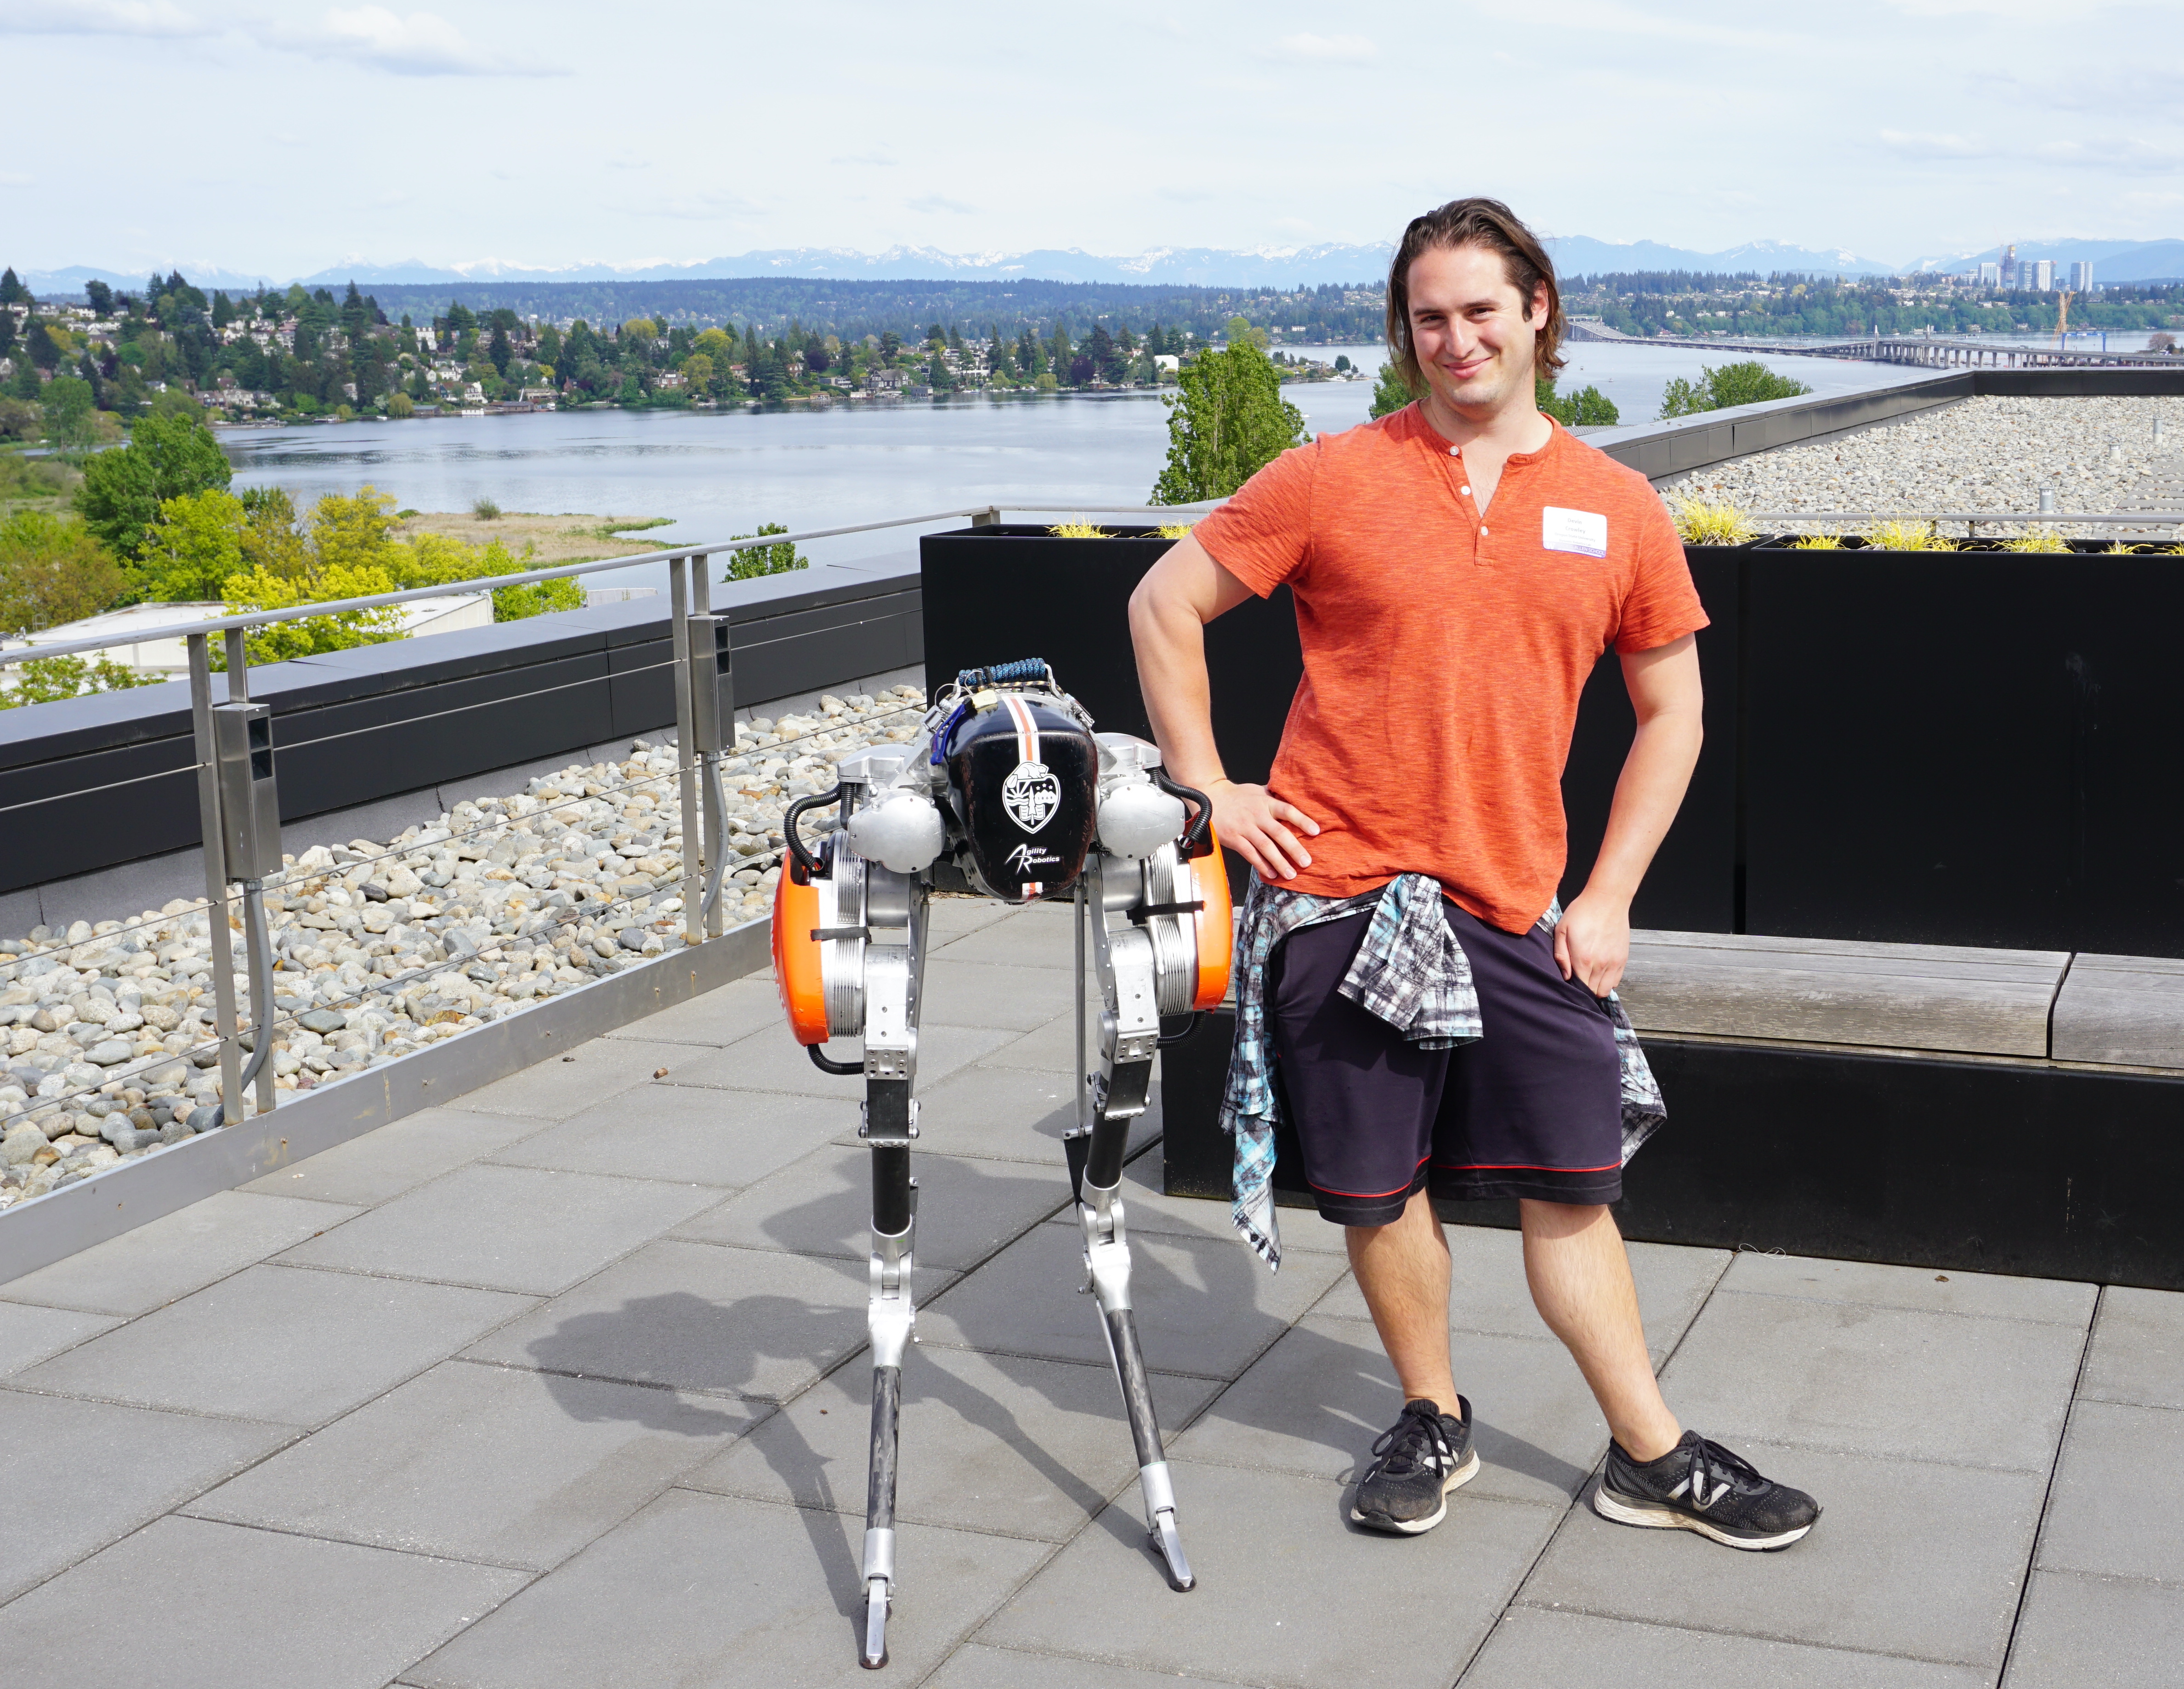 Honors alumni, Devin Crowley, stands outside next to the bipedal robot Cassie, built by Agility Robotics.